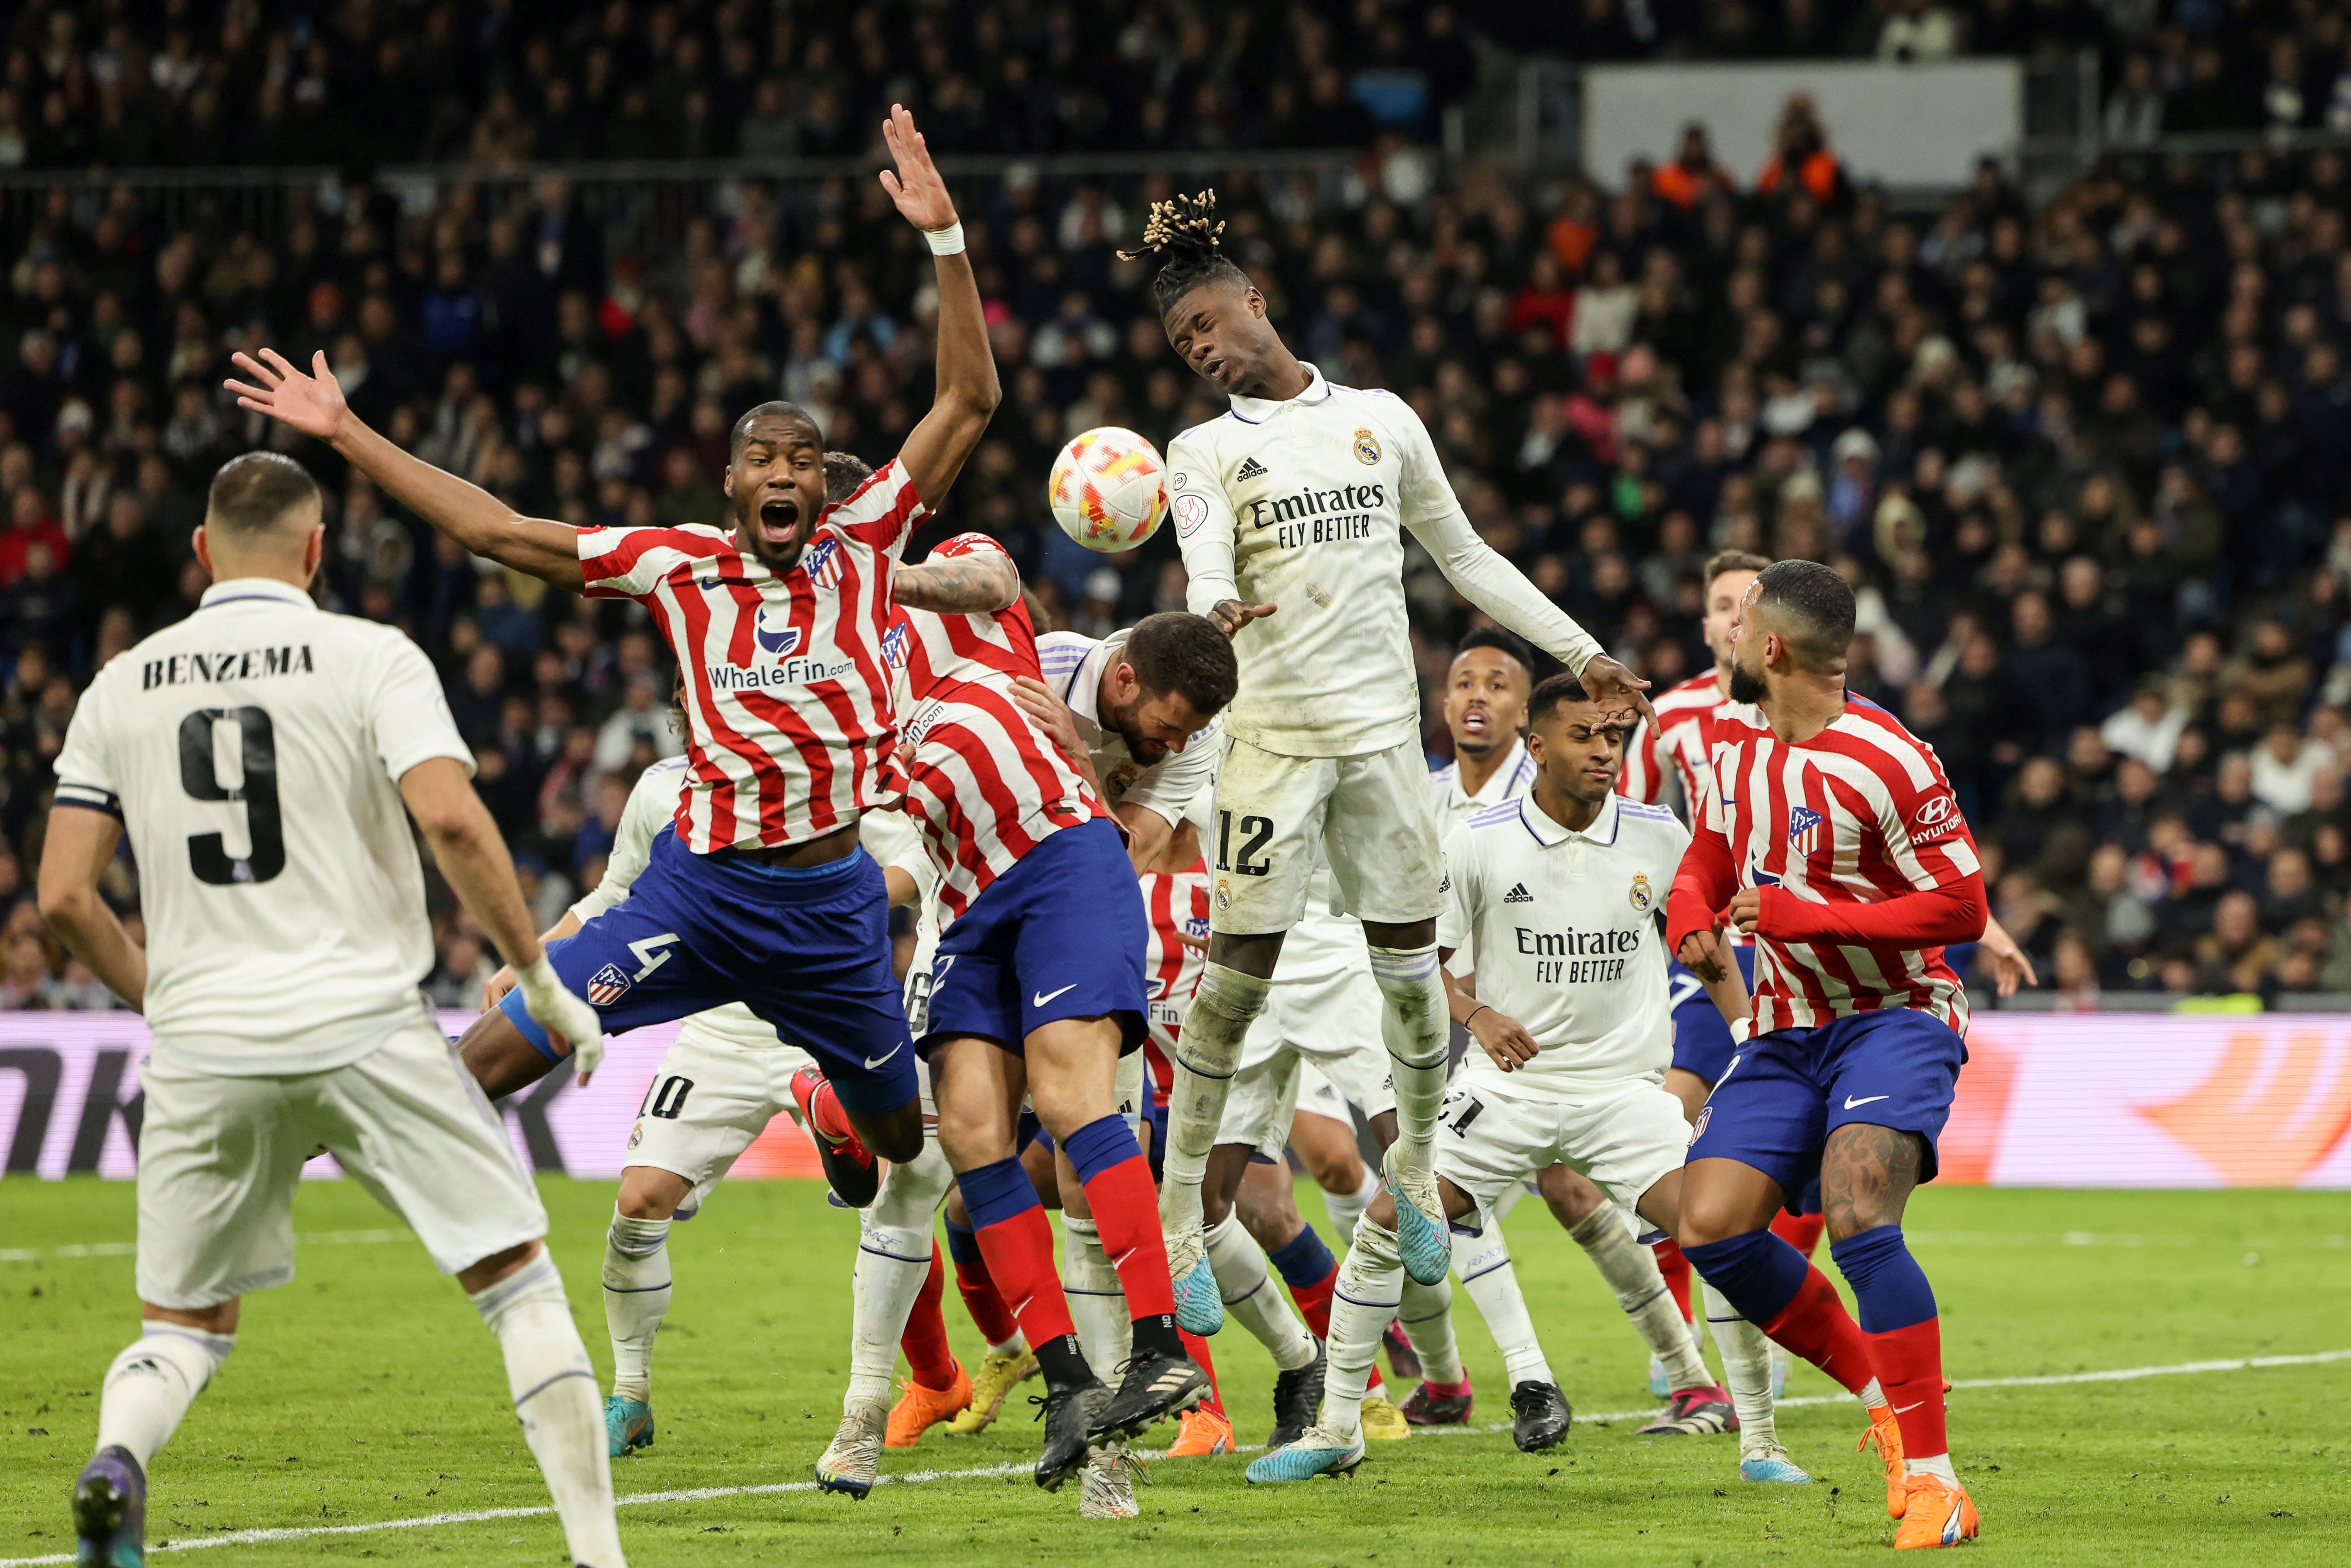 Atletico Madrid’s French midfielder Geoffrey Kondogbia (L) and Real Madrid’s French midfielder Eduardo Camavinga (C) jump for the ball during the Copa del Rey (King’s Cup), quarter final football match between Real Madrid CF and Club Atletico de Madrid at the Santiago Bernabeu stadium in Madrid on January 26, 2023.